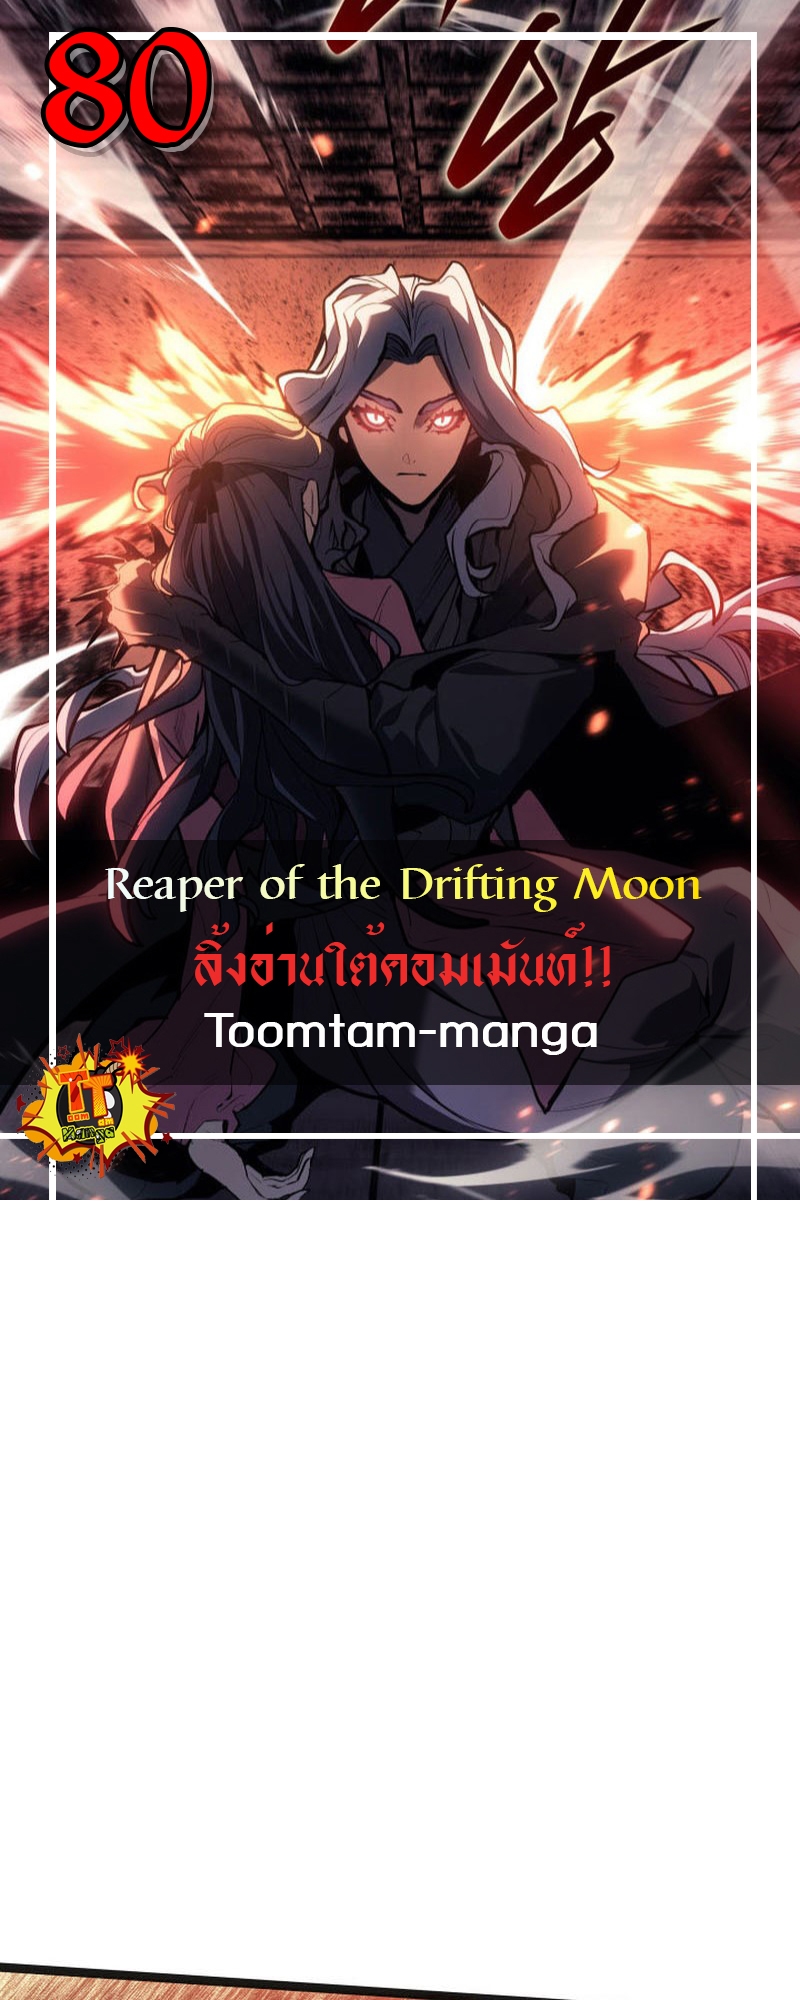 Reaper of the Drifting Moon 80 21 03 25670001